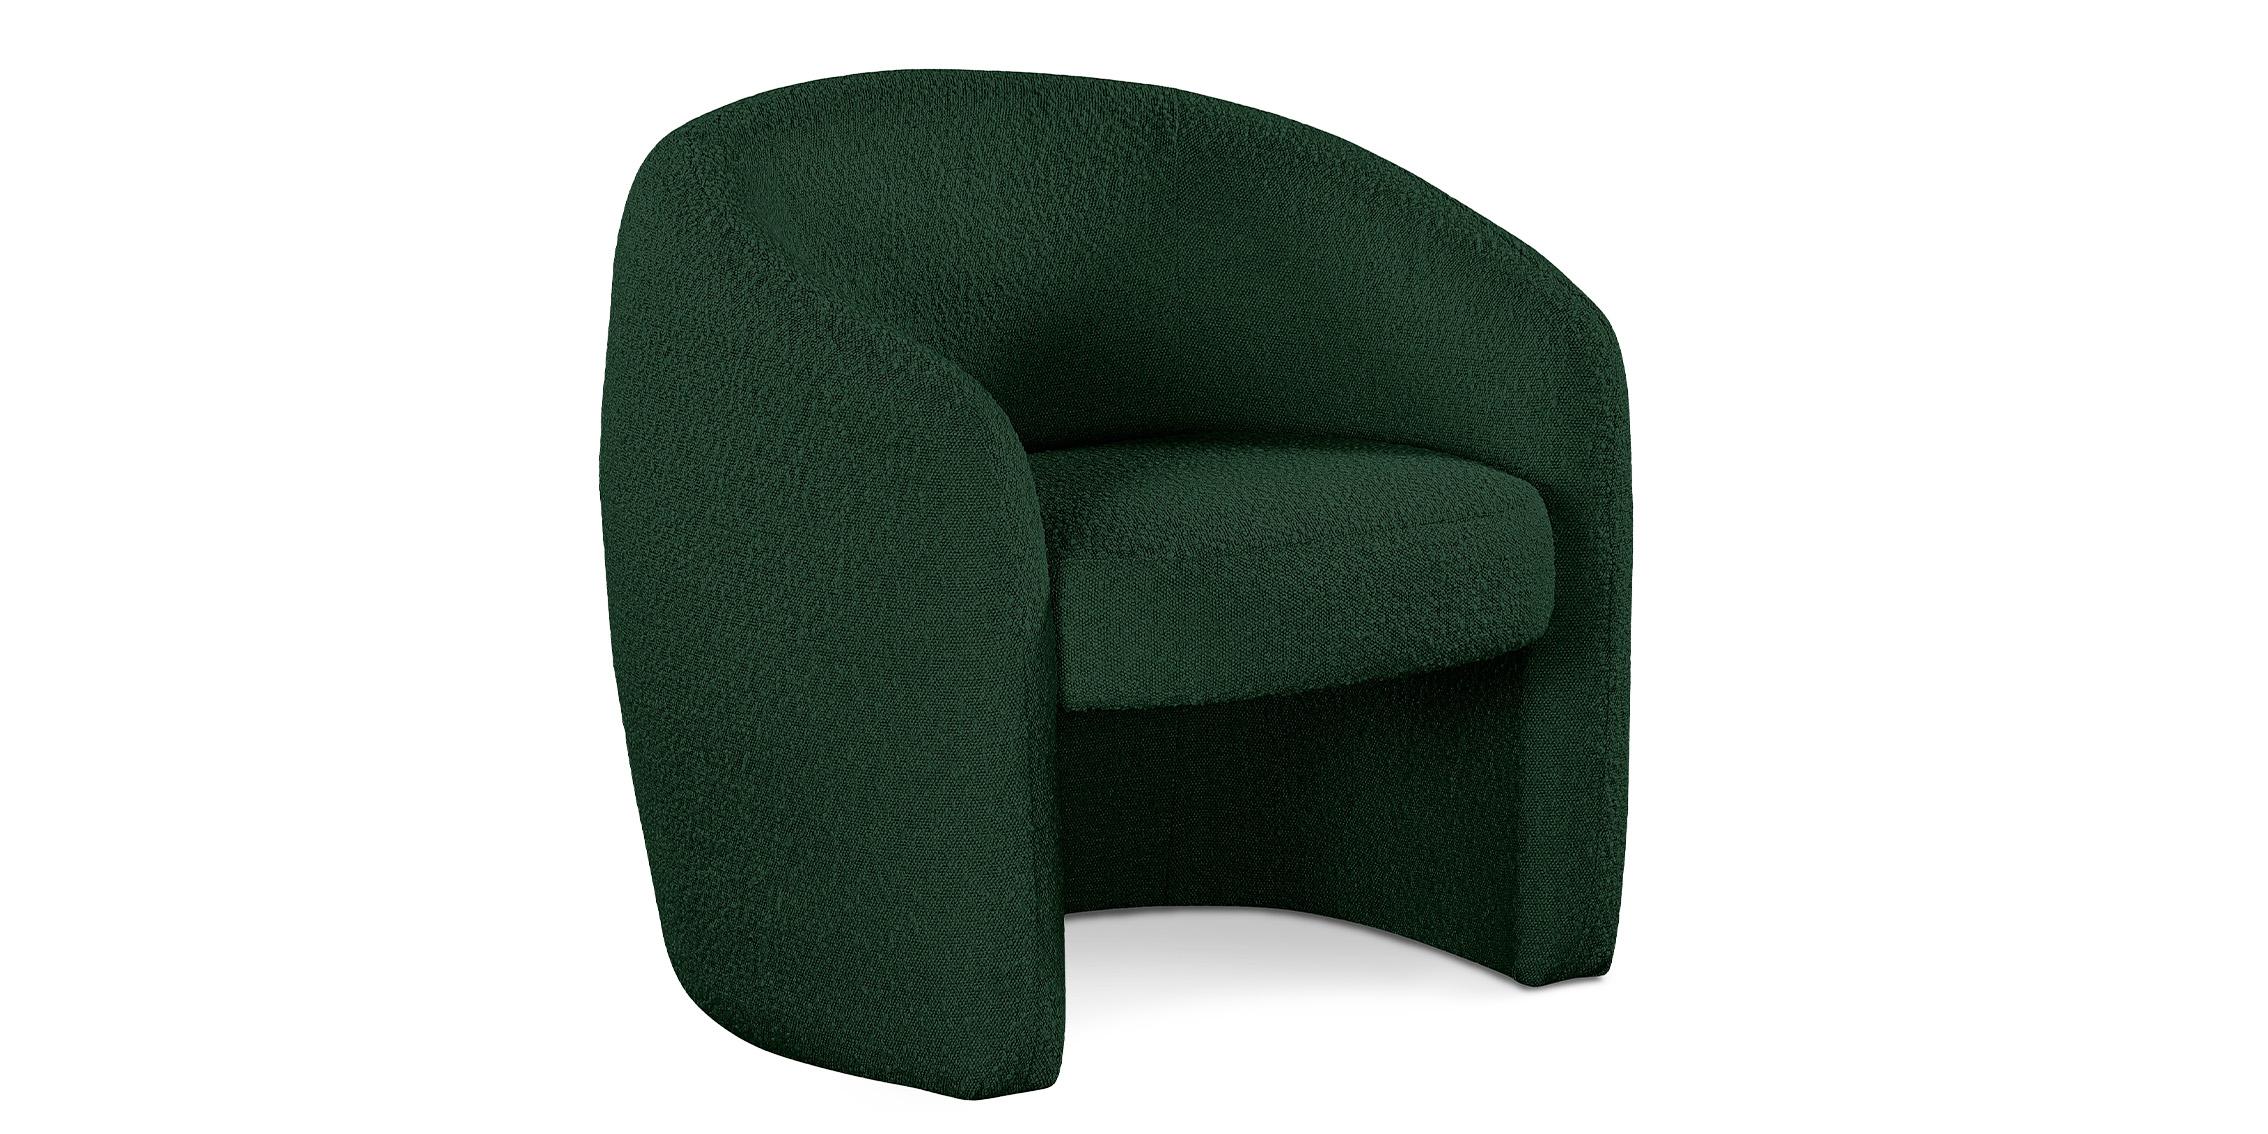 Contemporary, Modern Accent Chair ACADIA 543Green 543Green in Green 